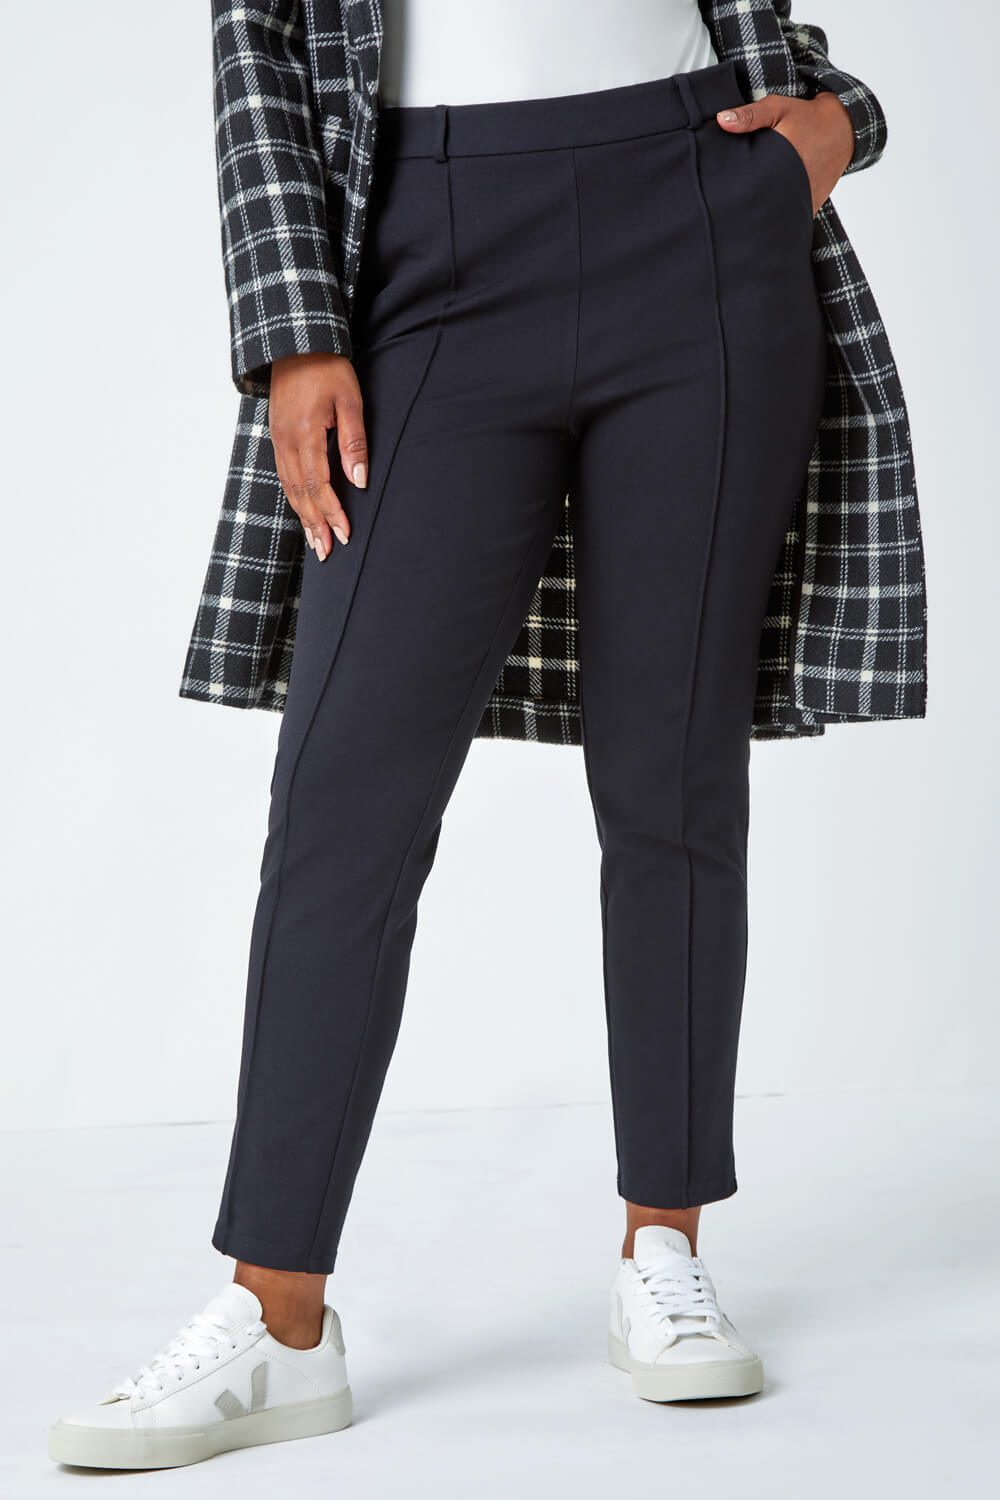 Black Petite Slim Fit Stretch Trousers, Image 4 of 5